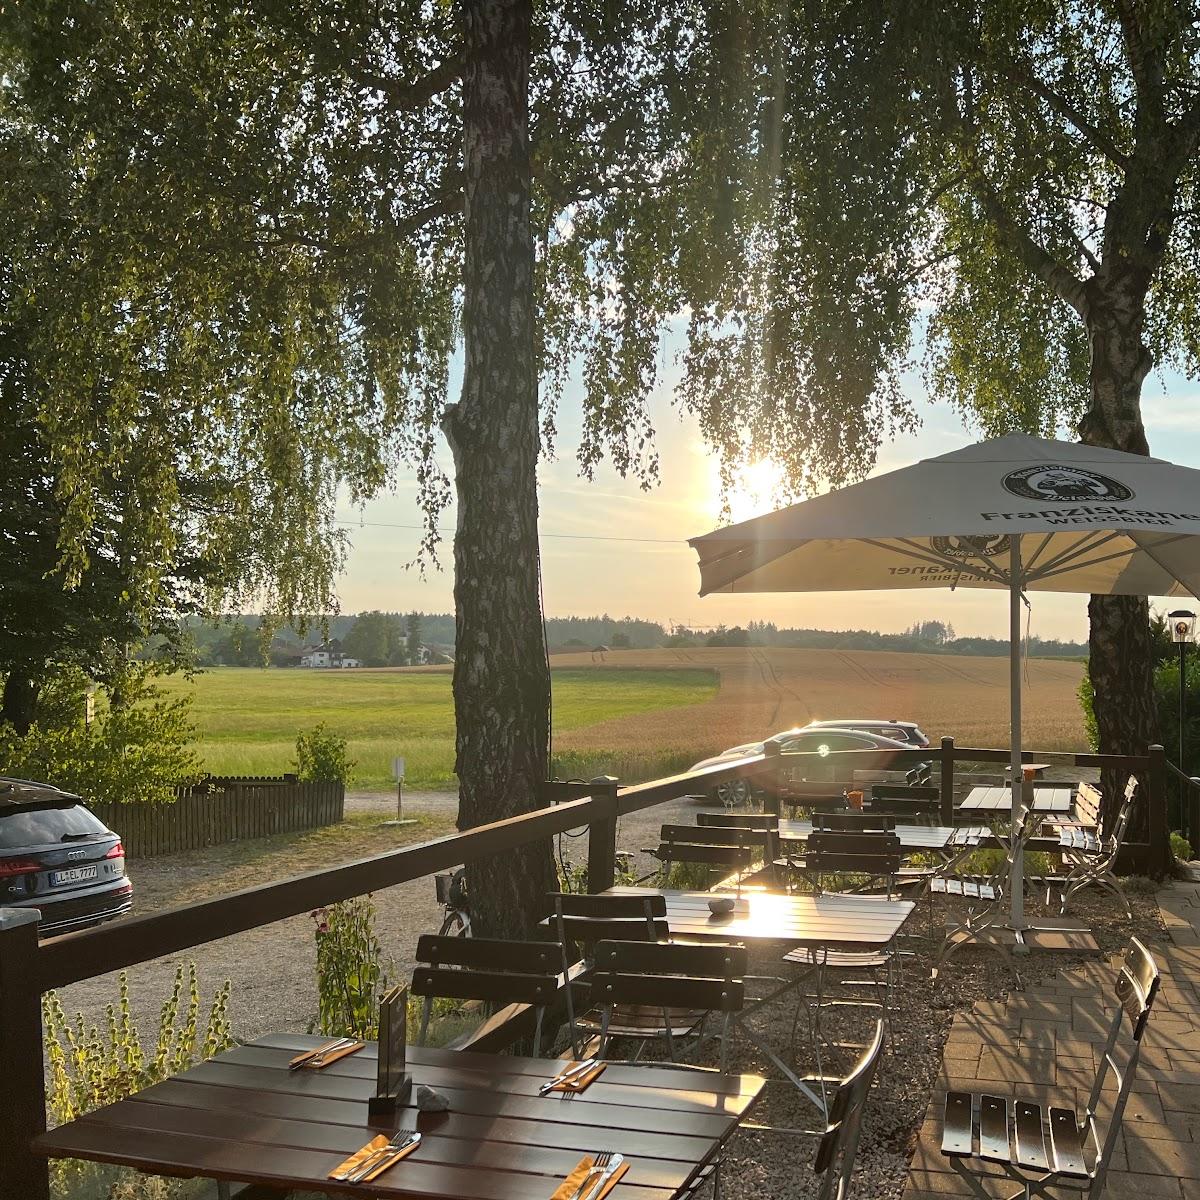 Restaurant "RoXee" in Inning am Ammersee